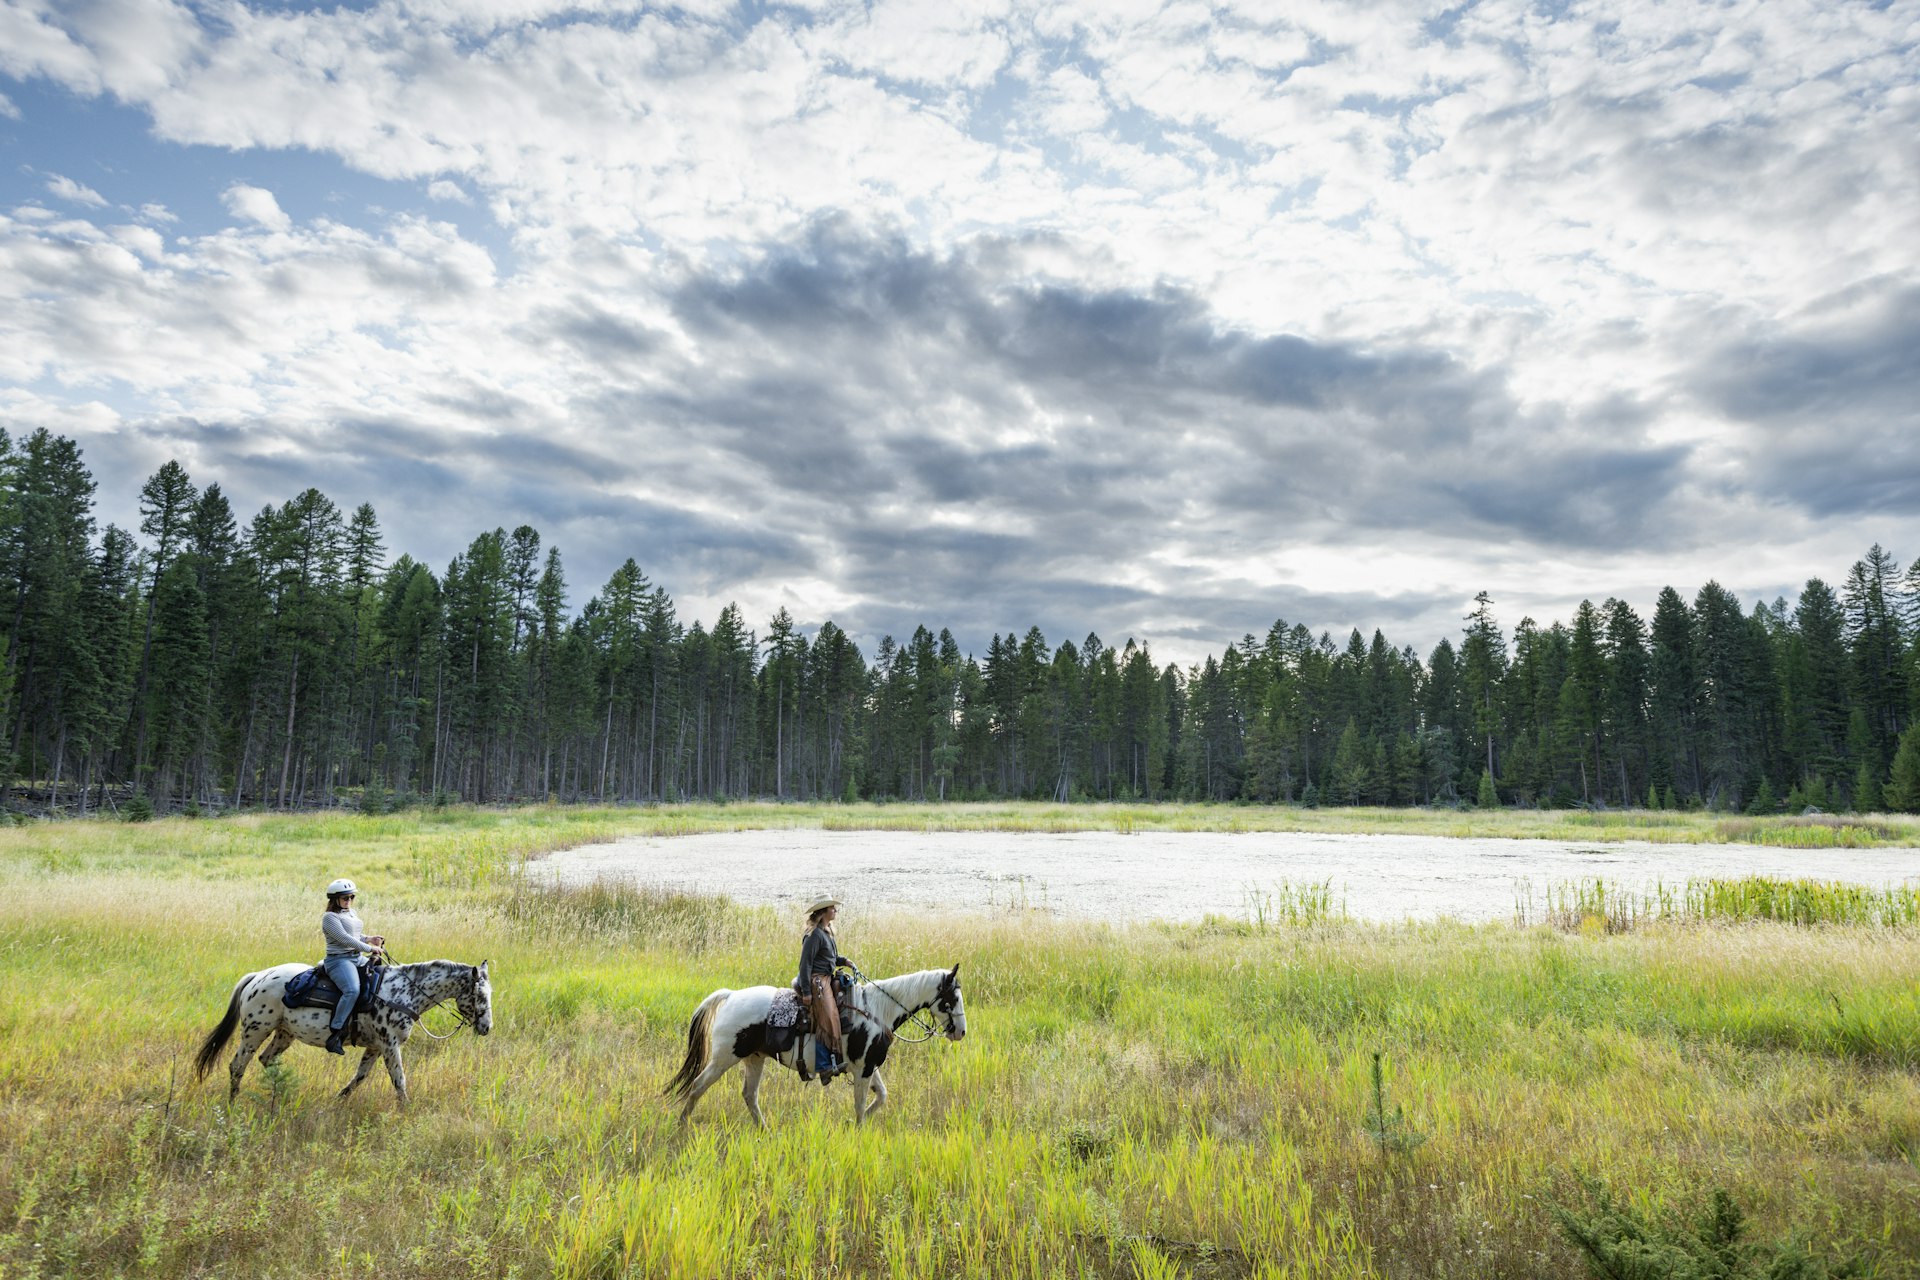 Horse riders in Glacier National Park